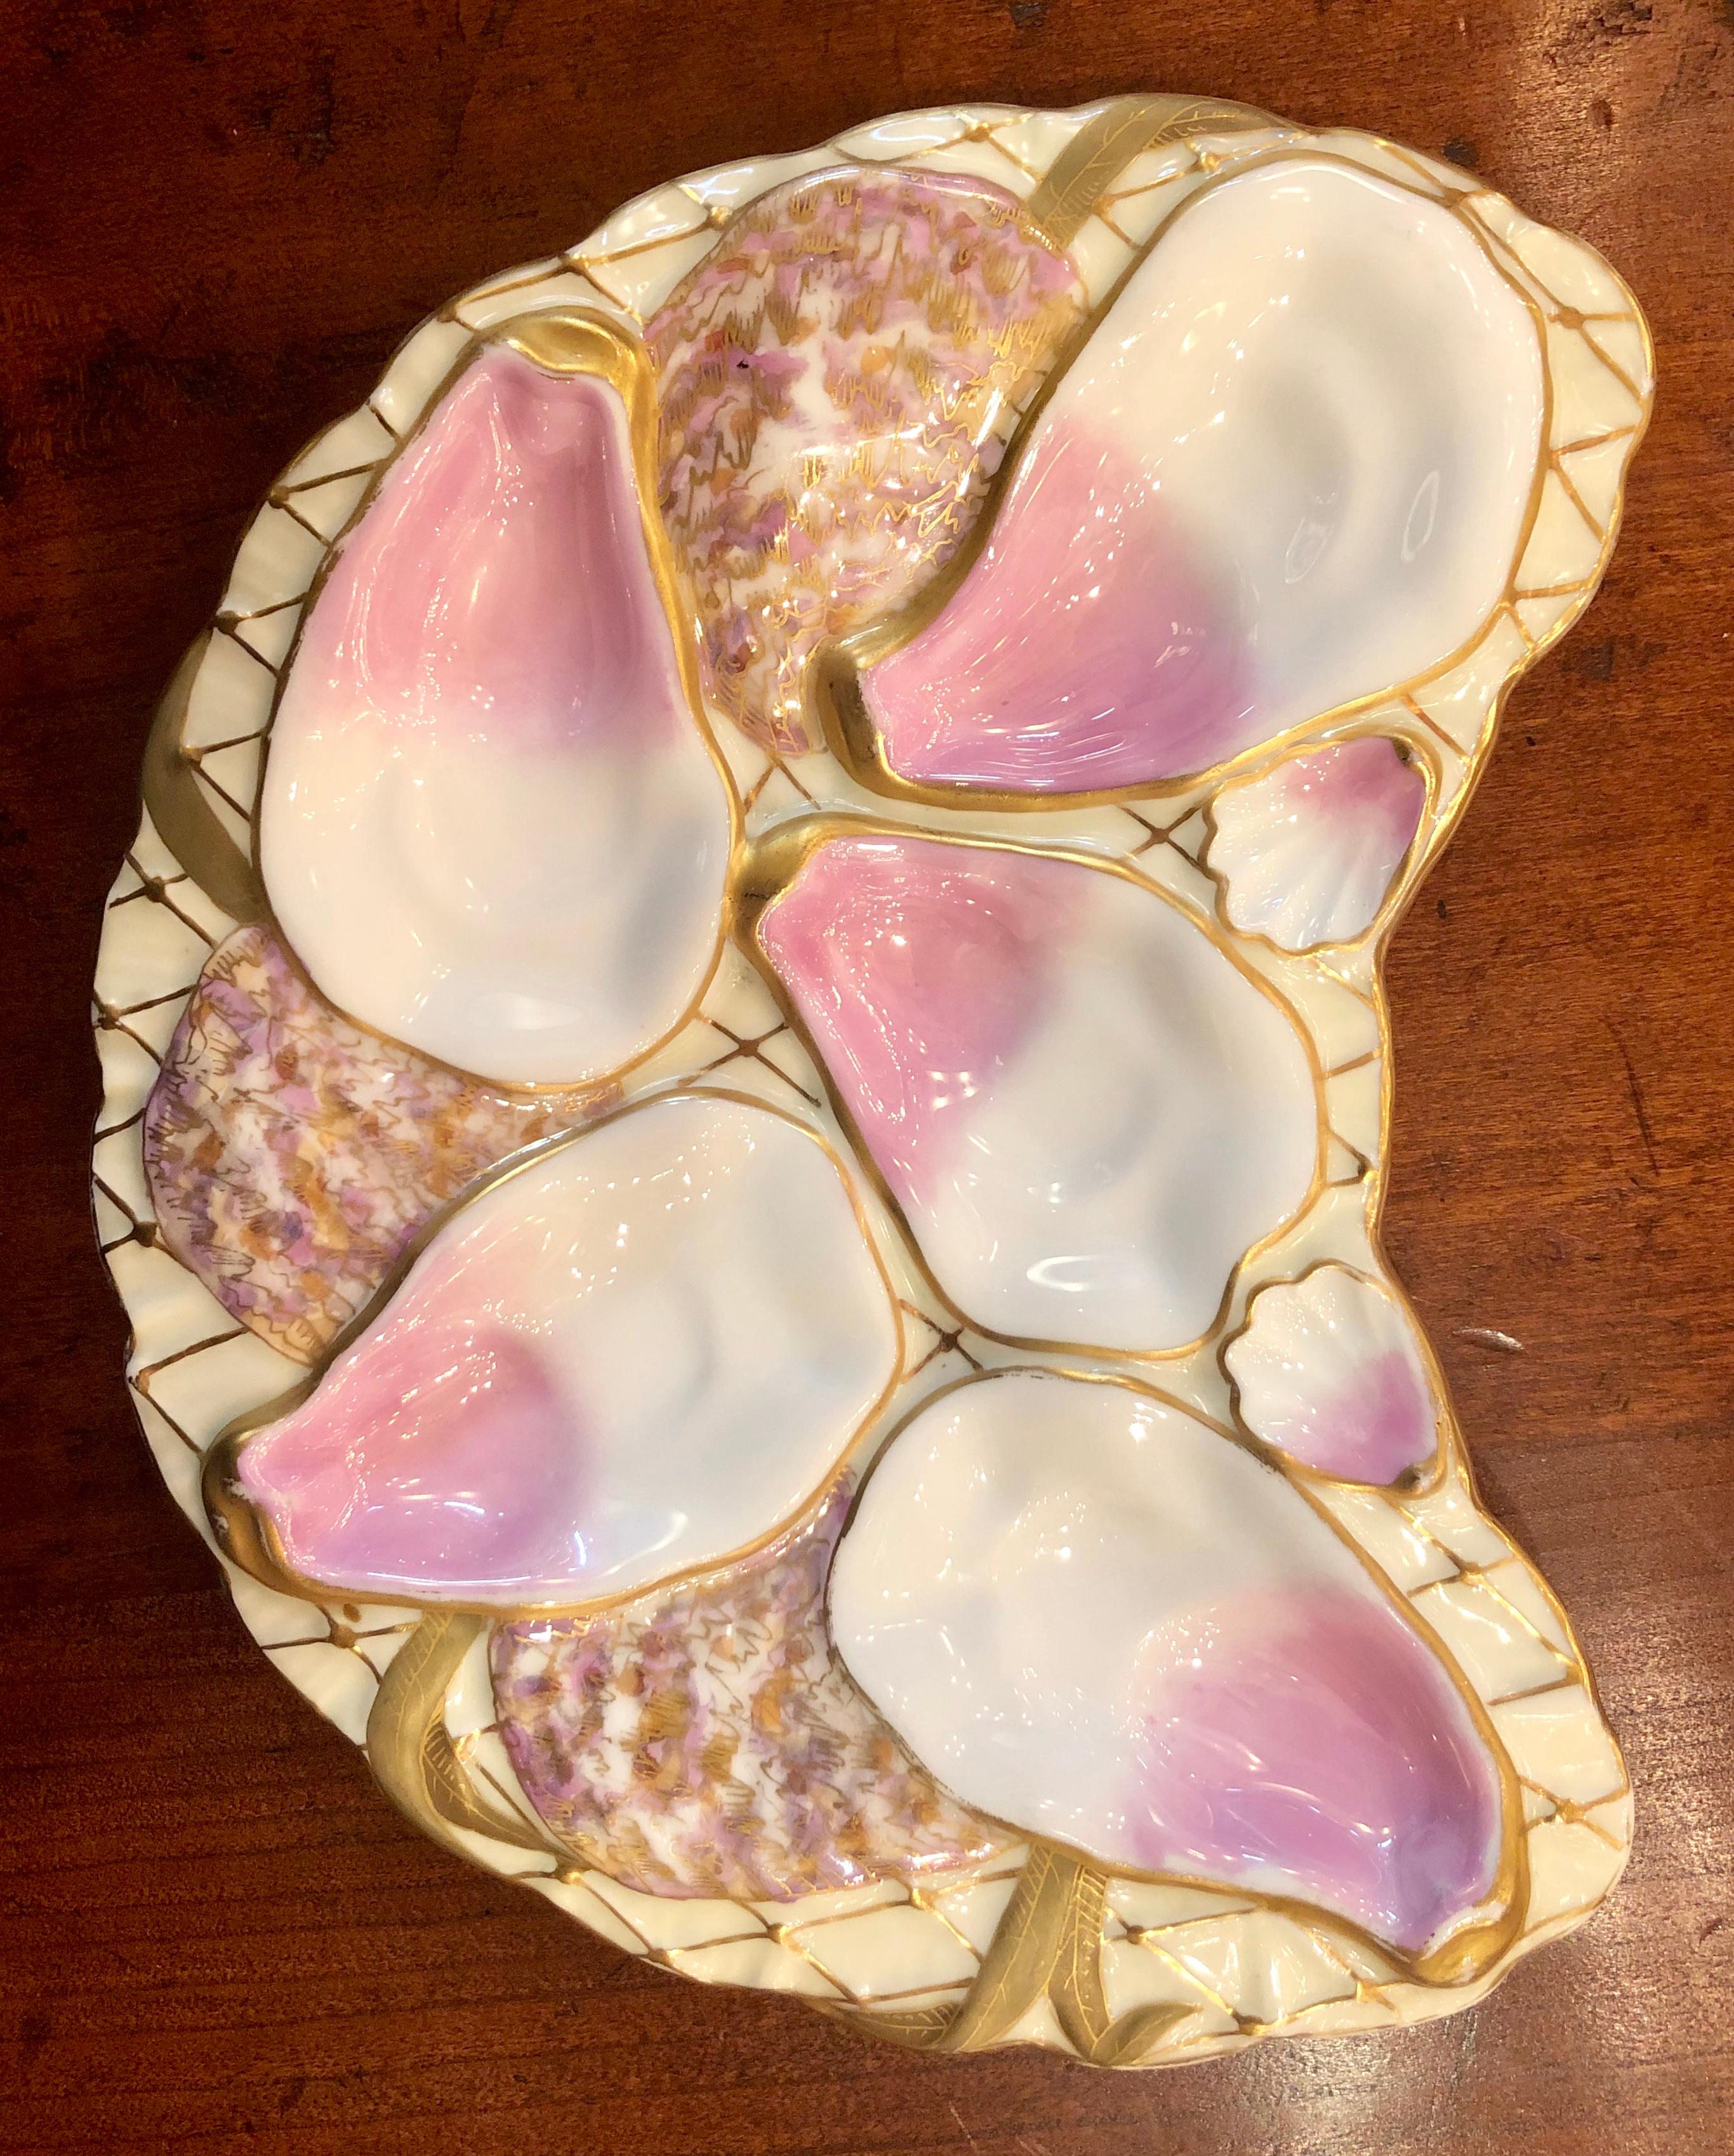 Antique continental hand painted porcelain oyster plate made for Wilhelm & Graef Co., New York, circa 1900.